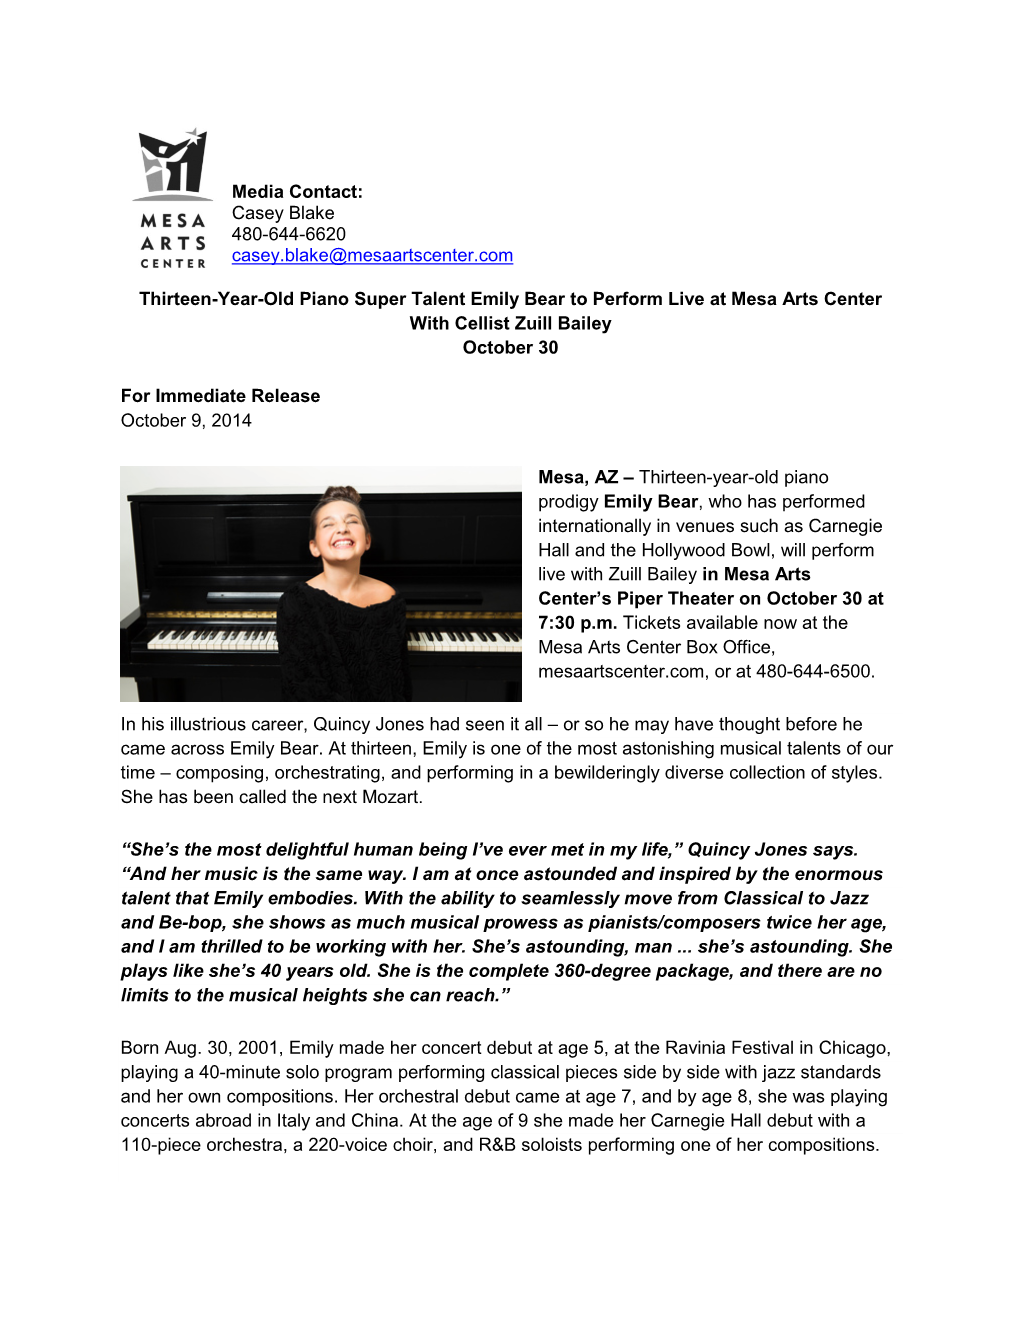 Thirteen-Year-Old Piano Super Talent Emily Bear to Perform Live at Mesa Arts Center with Cellist Zuill Bailey October 30